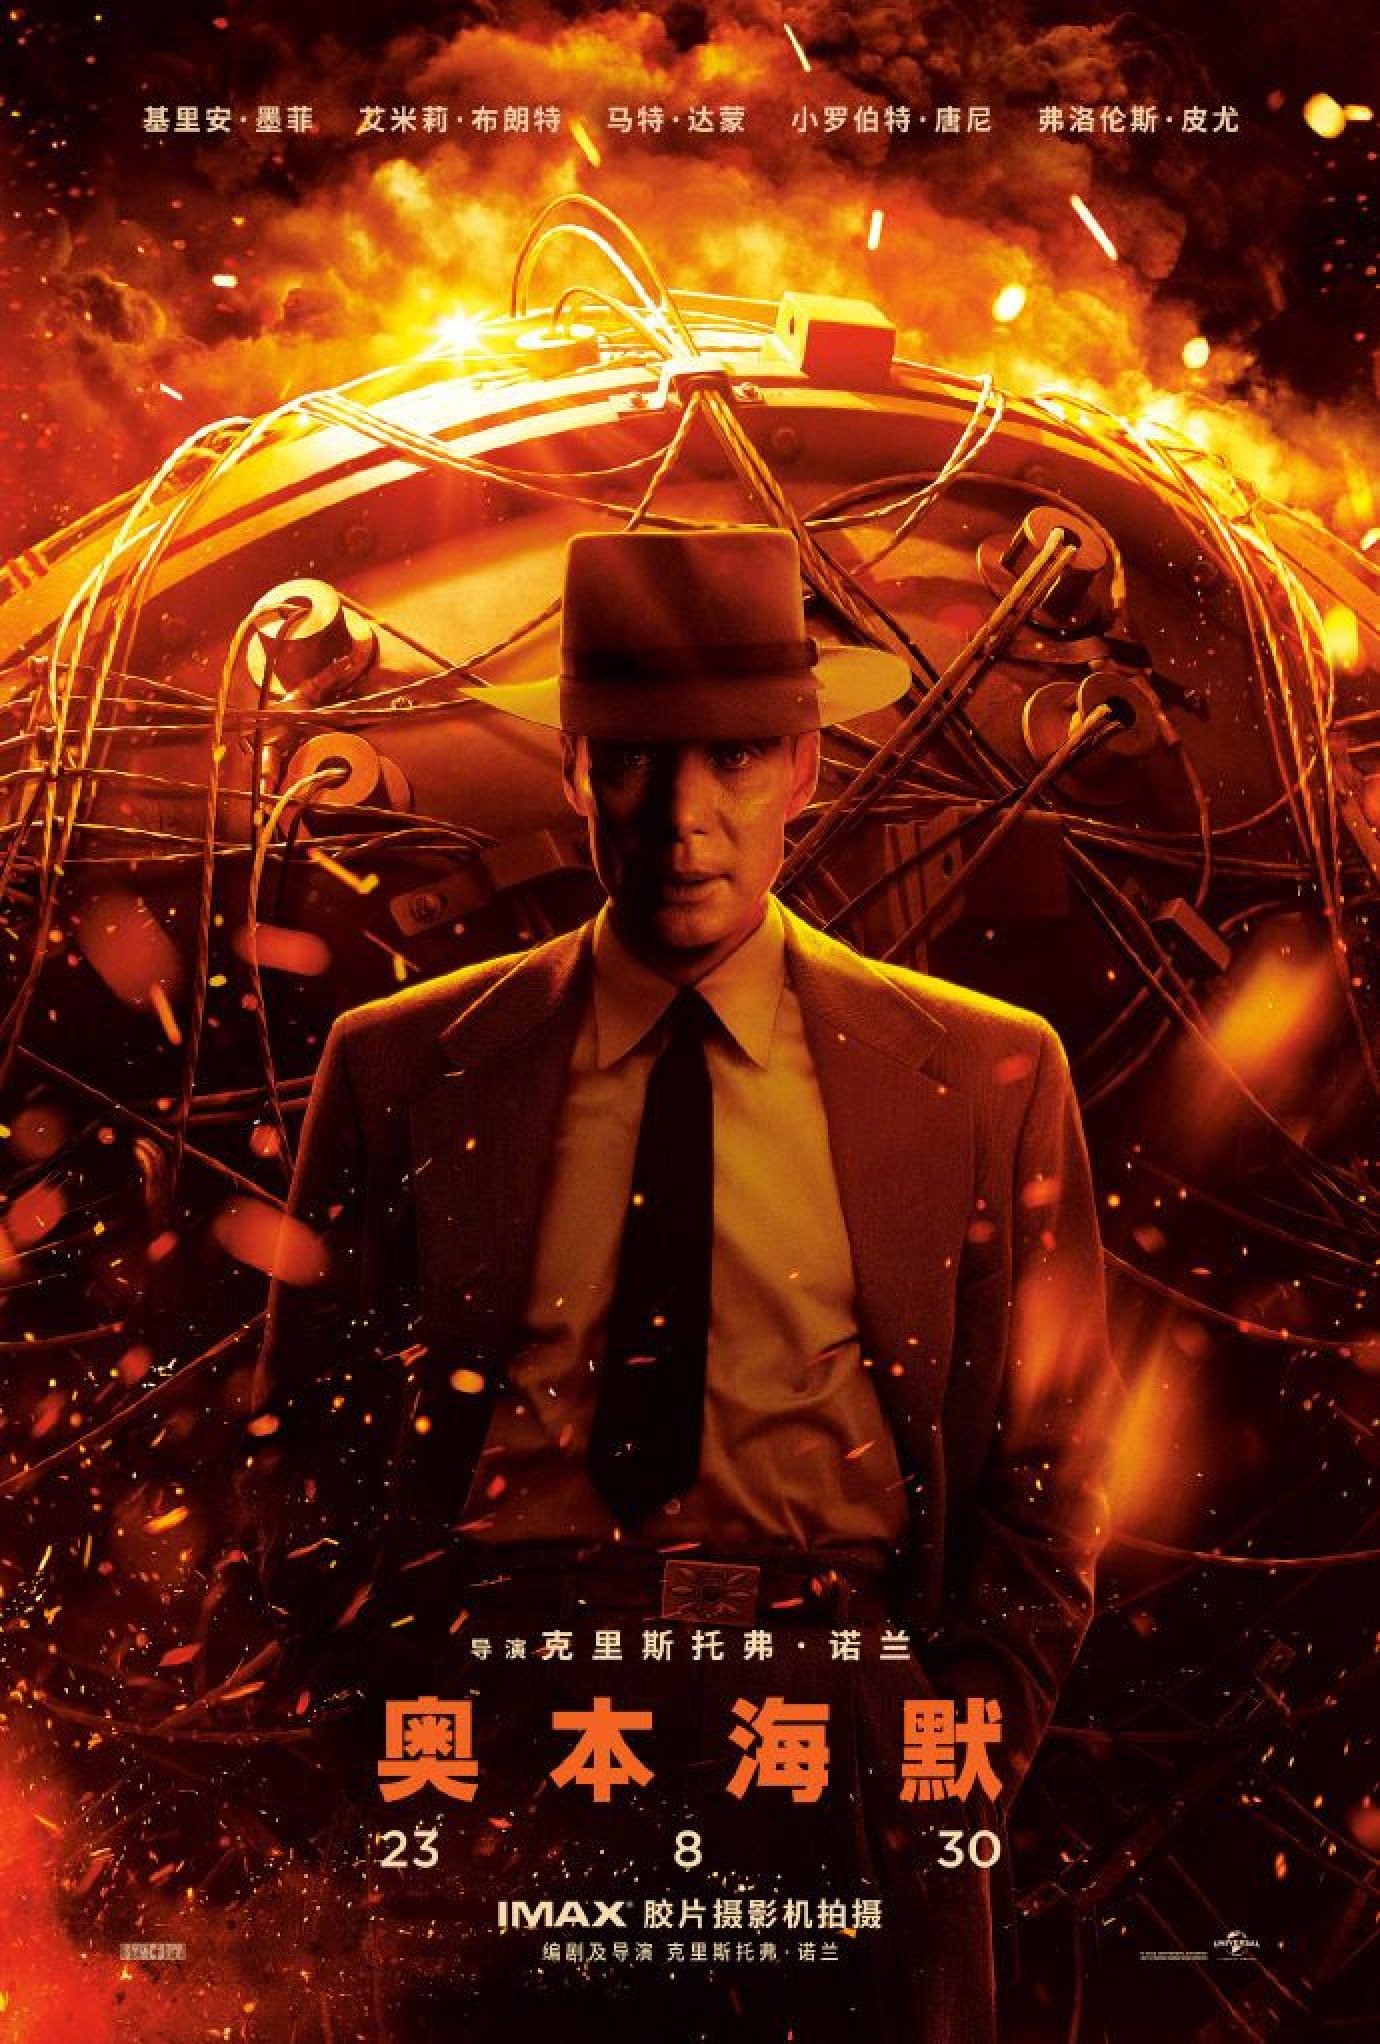 Weeks after the film opened in Hong Kong, it has been announced that moviegoers on the mainland will be able to watch the film there from August 30. Photo: Universal Pictures